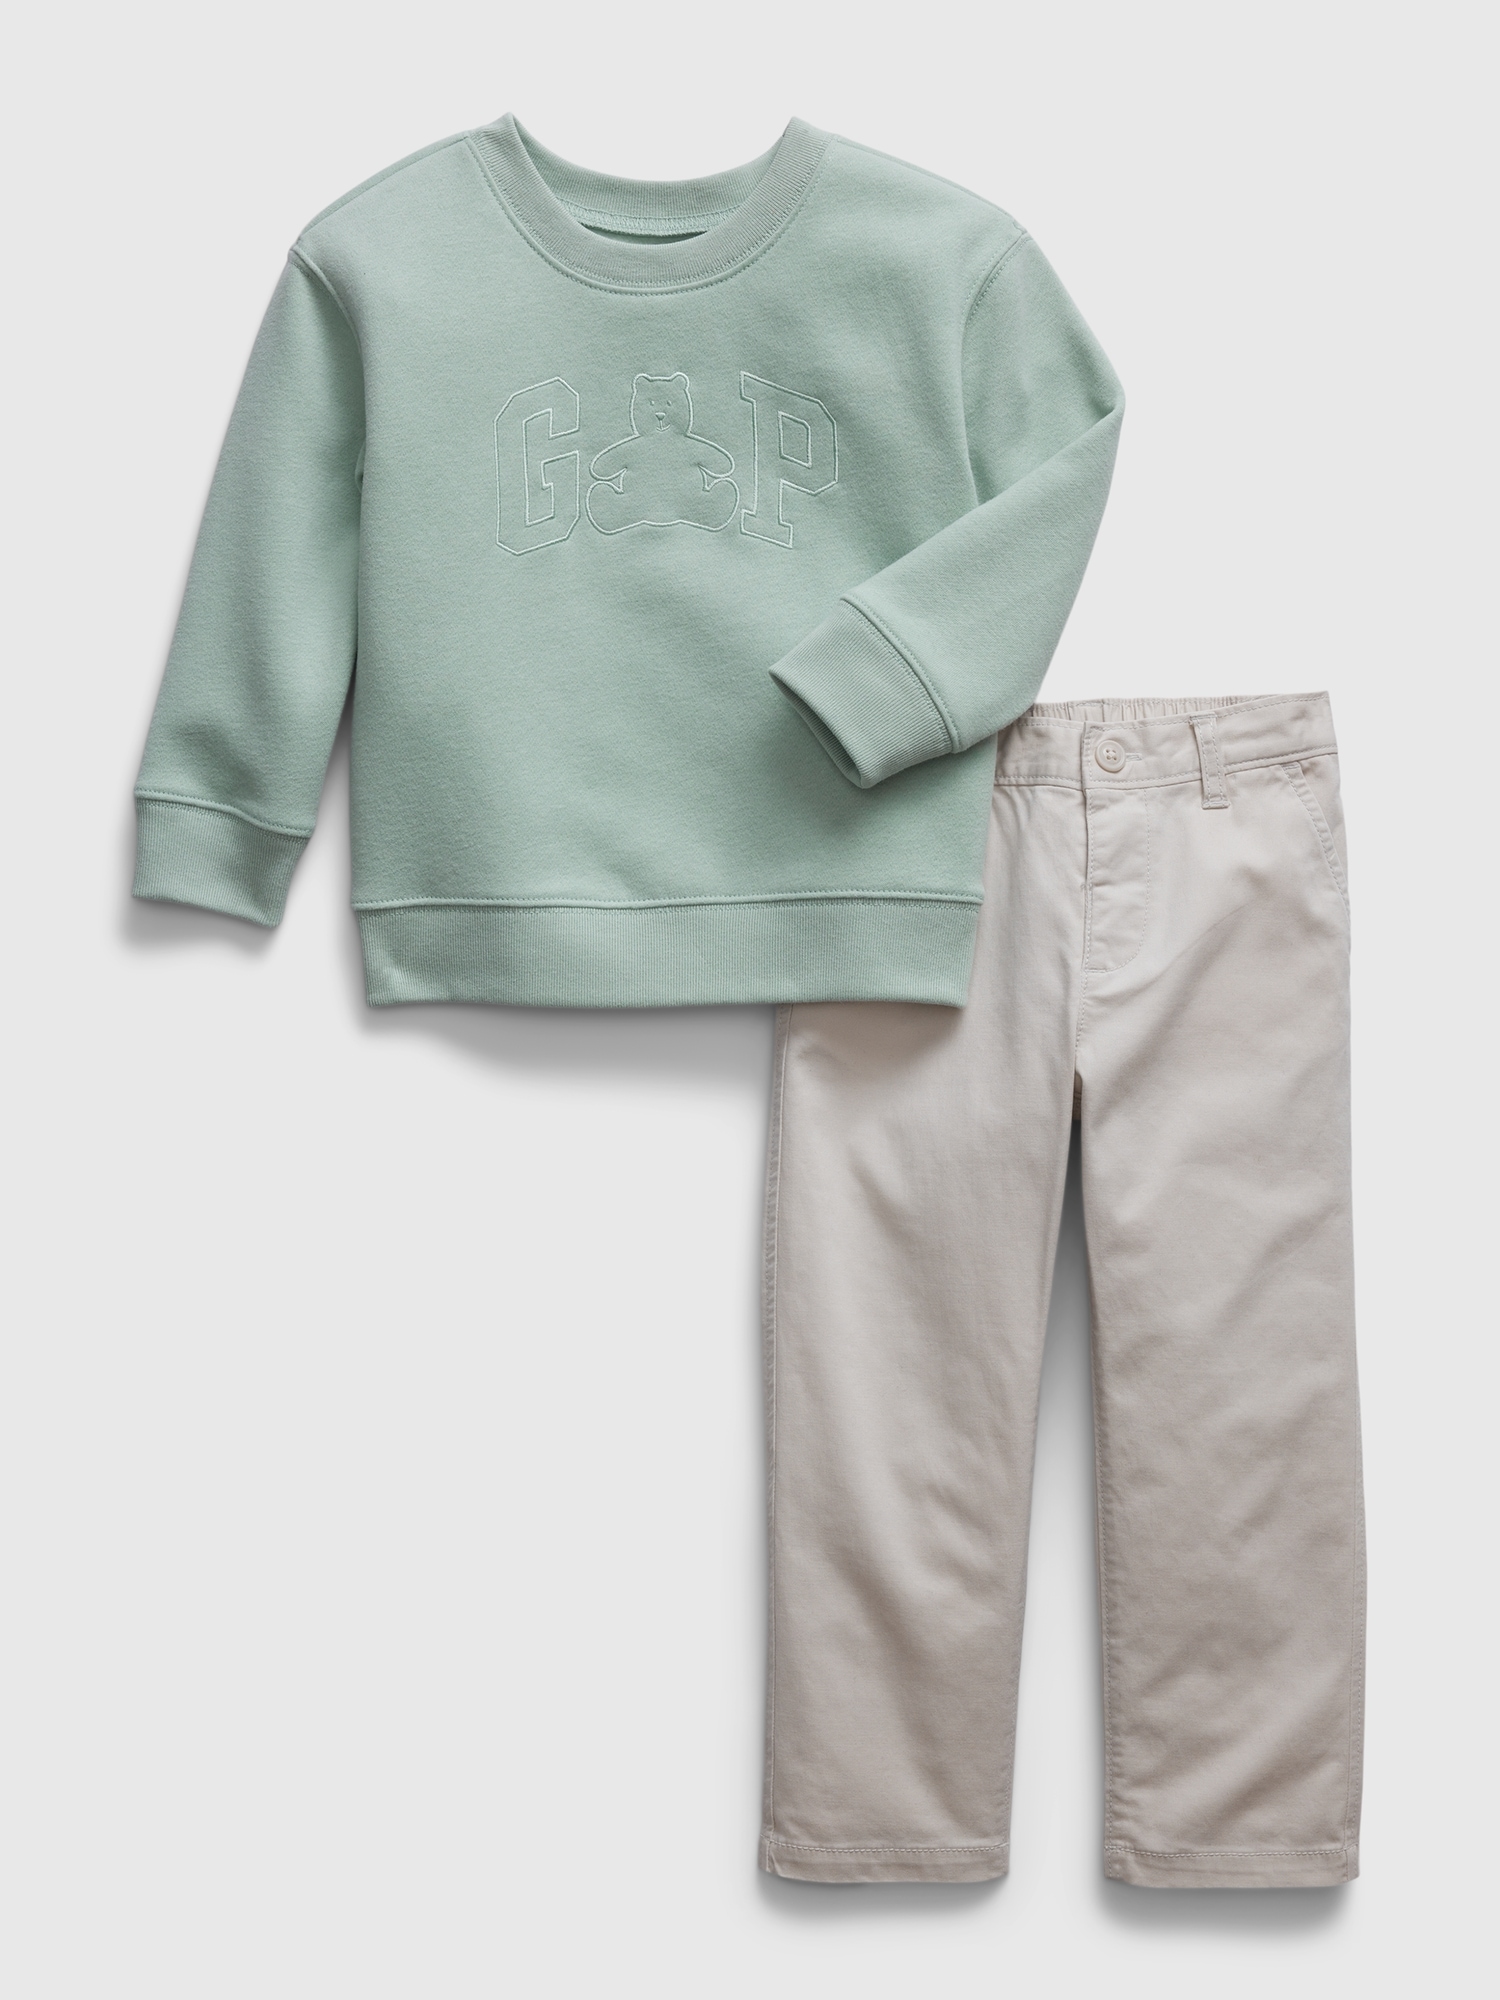 Gap Babies' Toddler Logo Two-piece Outfit Set In Frothy Aqua Blue